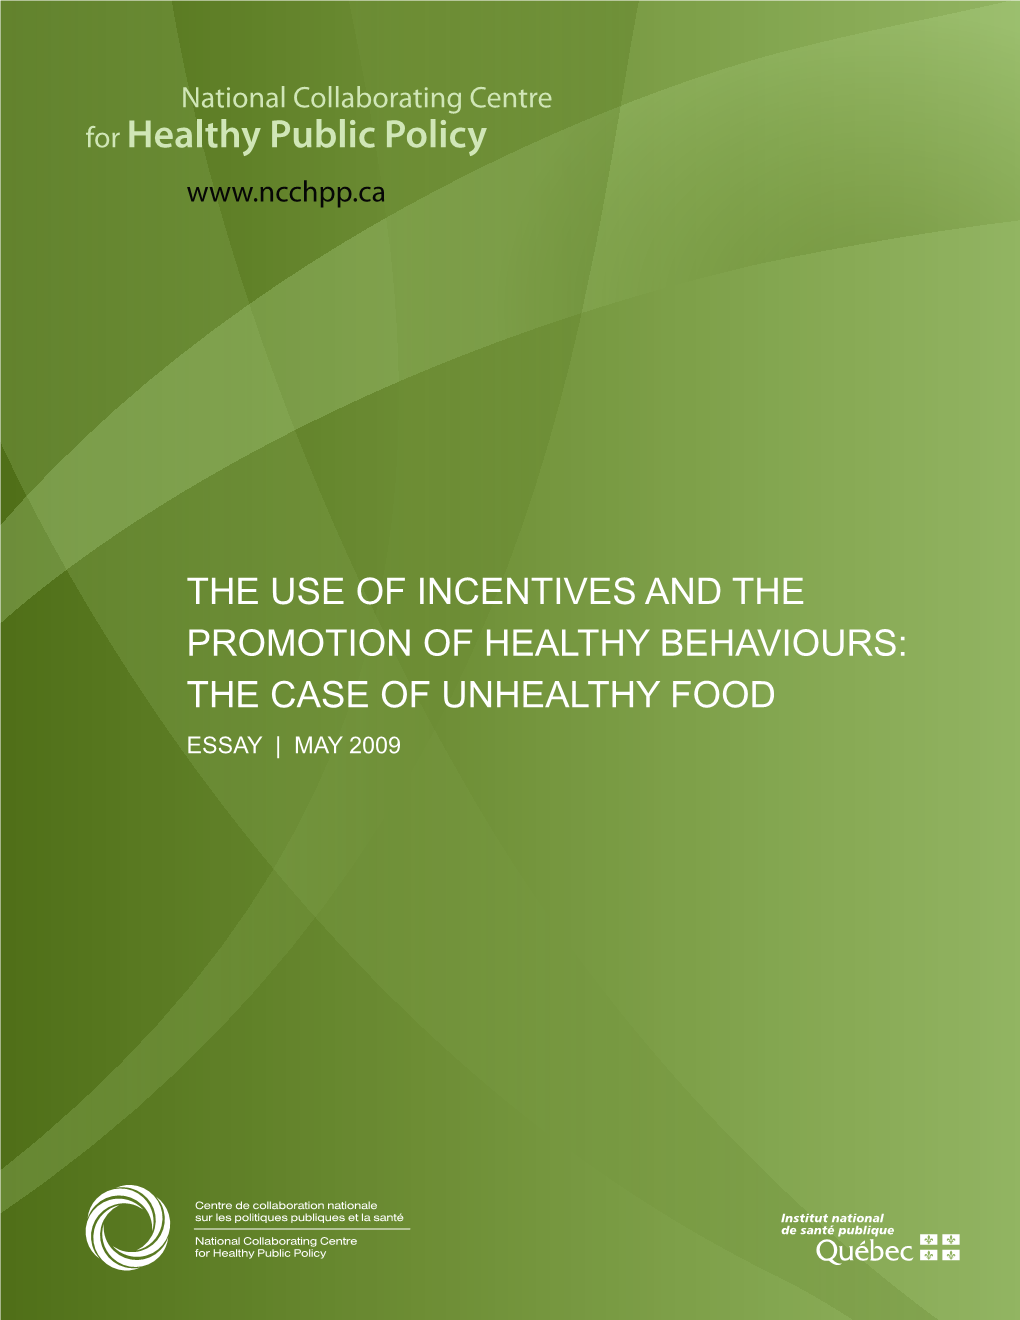 The Use of Incentives and the Promotion of Healthy Behaviours: the Case of Unhealthy Food Essay | May 2009